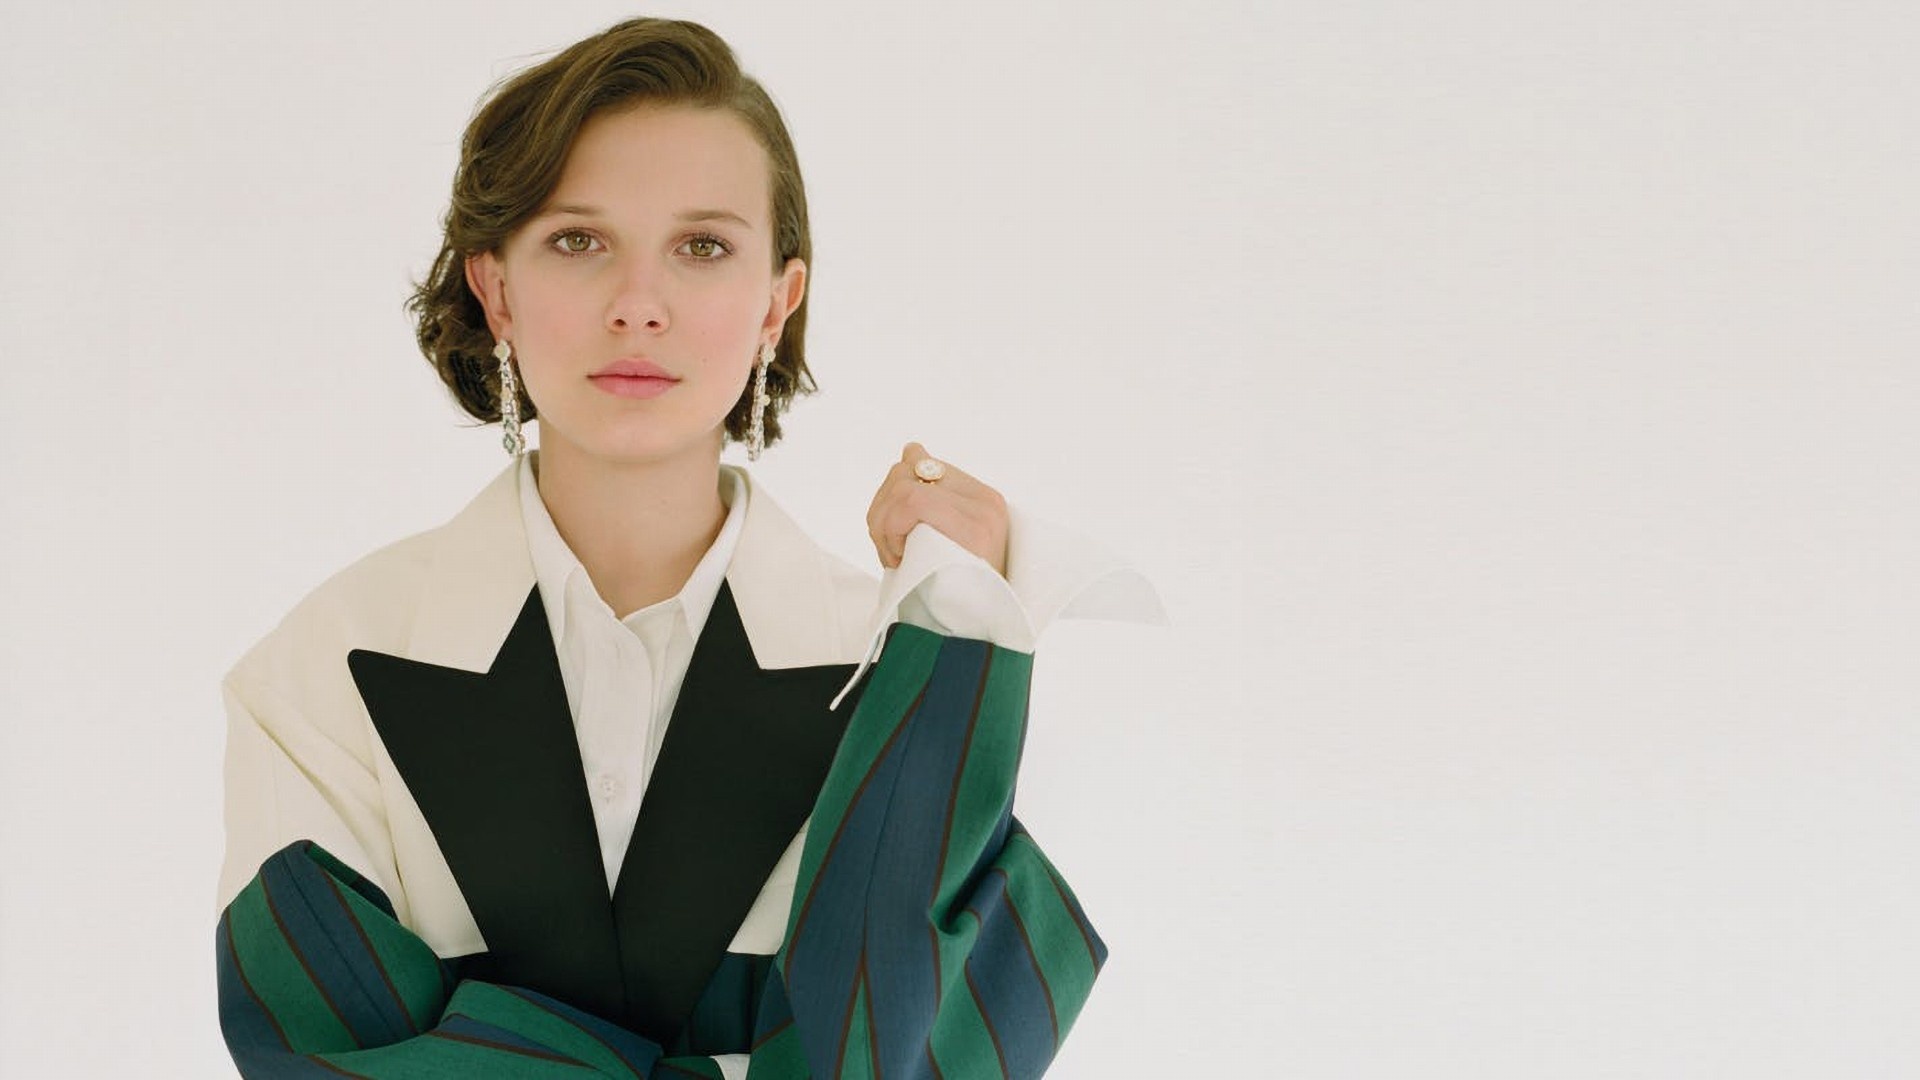 Millie Bobby Brown: Spanish-born British actress who portrays Eleven in the Netflix original series Stranger Things. 1920x1080 Full HD Background.